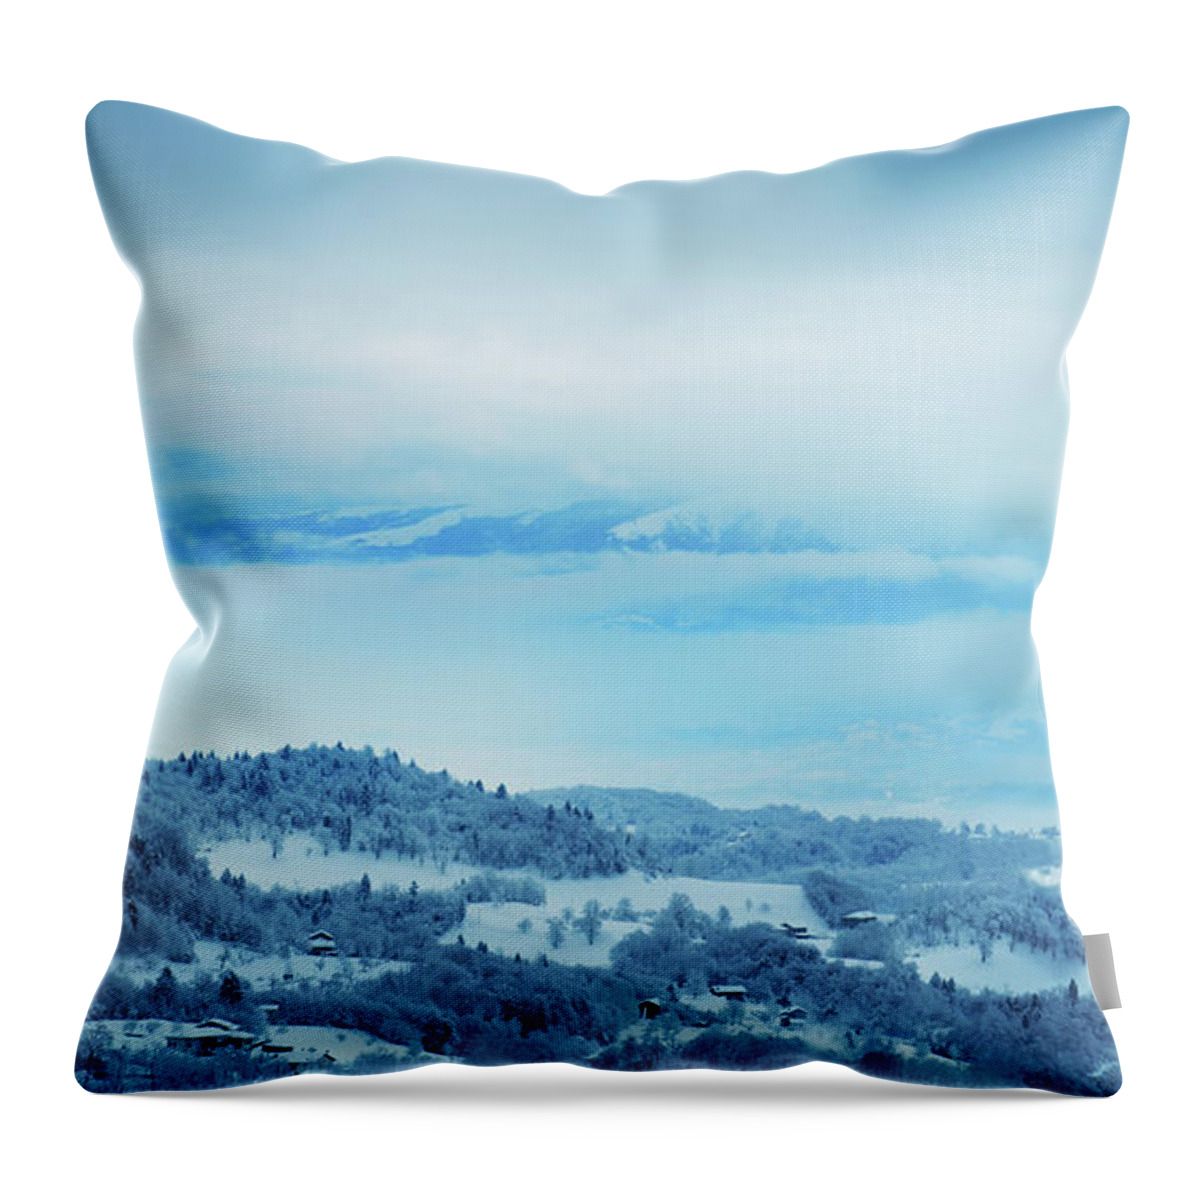 Scenics Throw Pillow featuring the photograph Winter Nature by Loops7